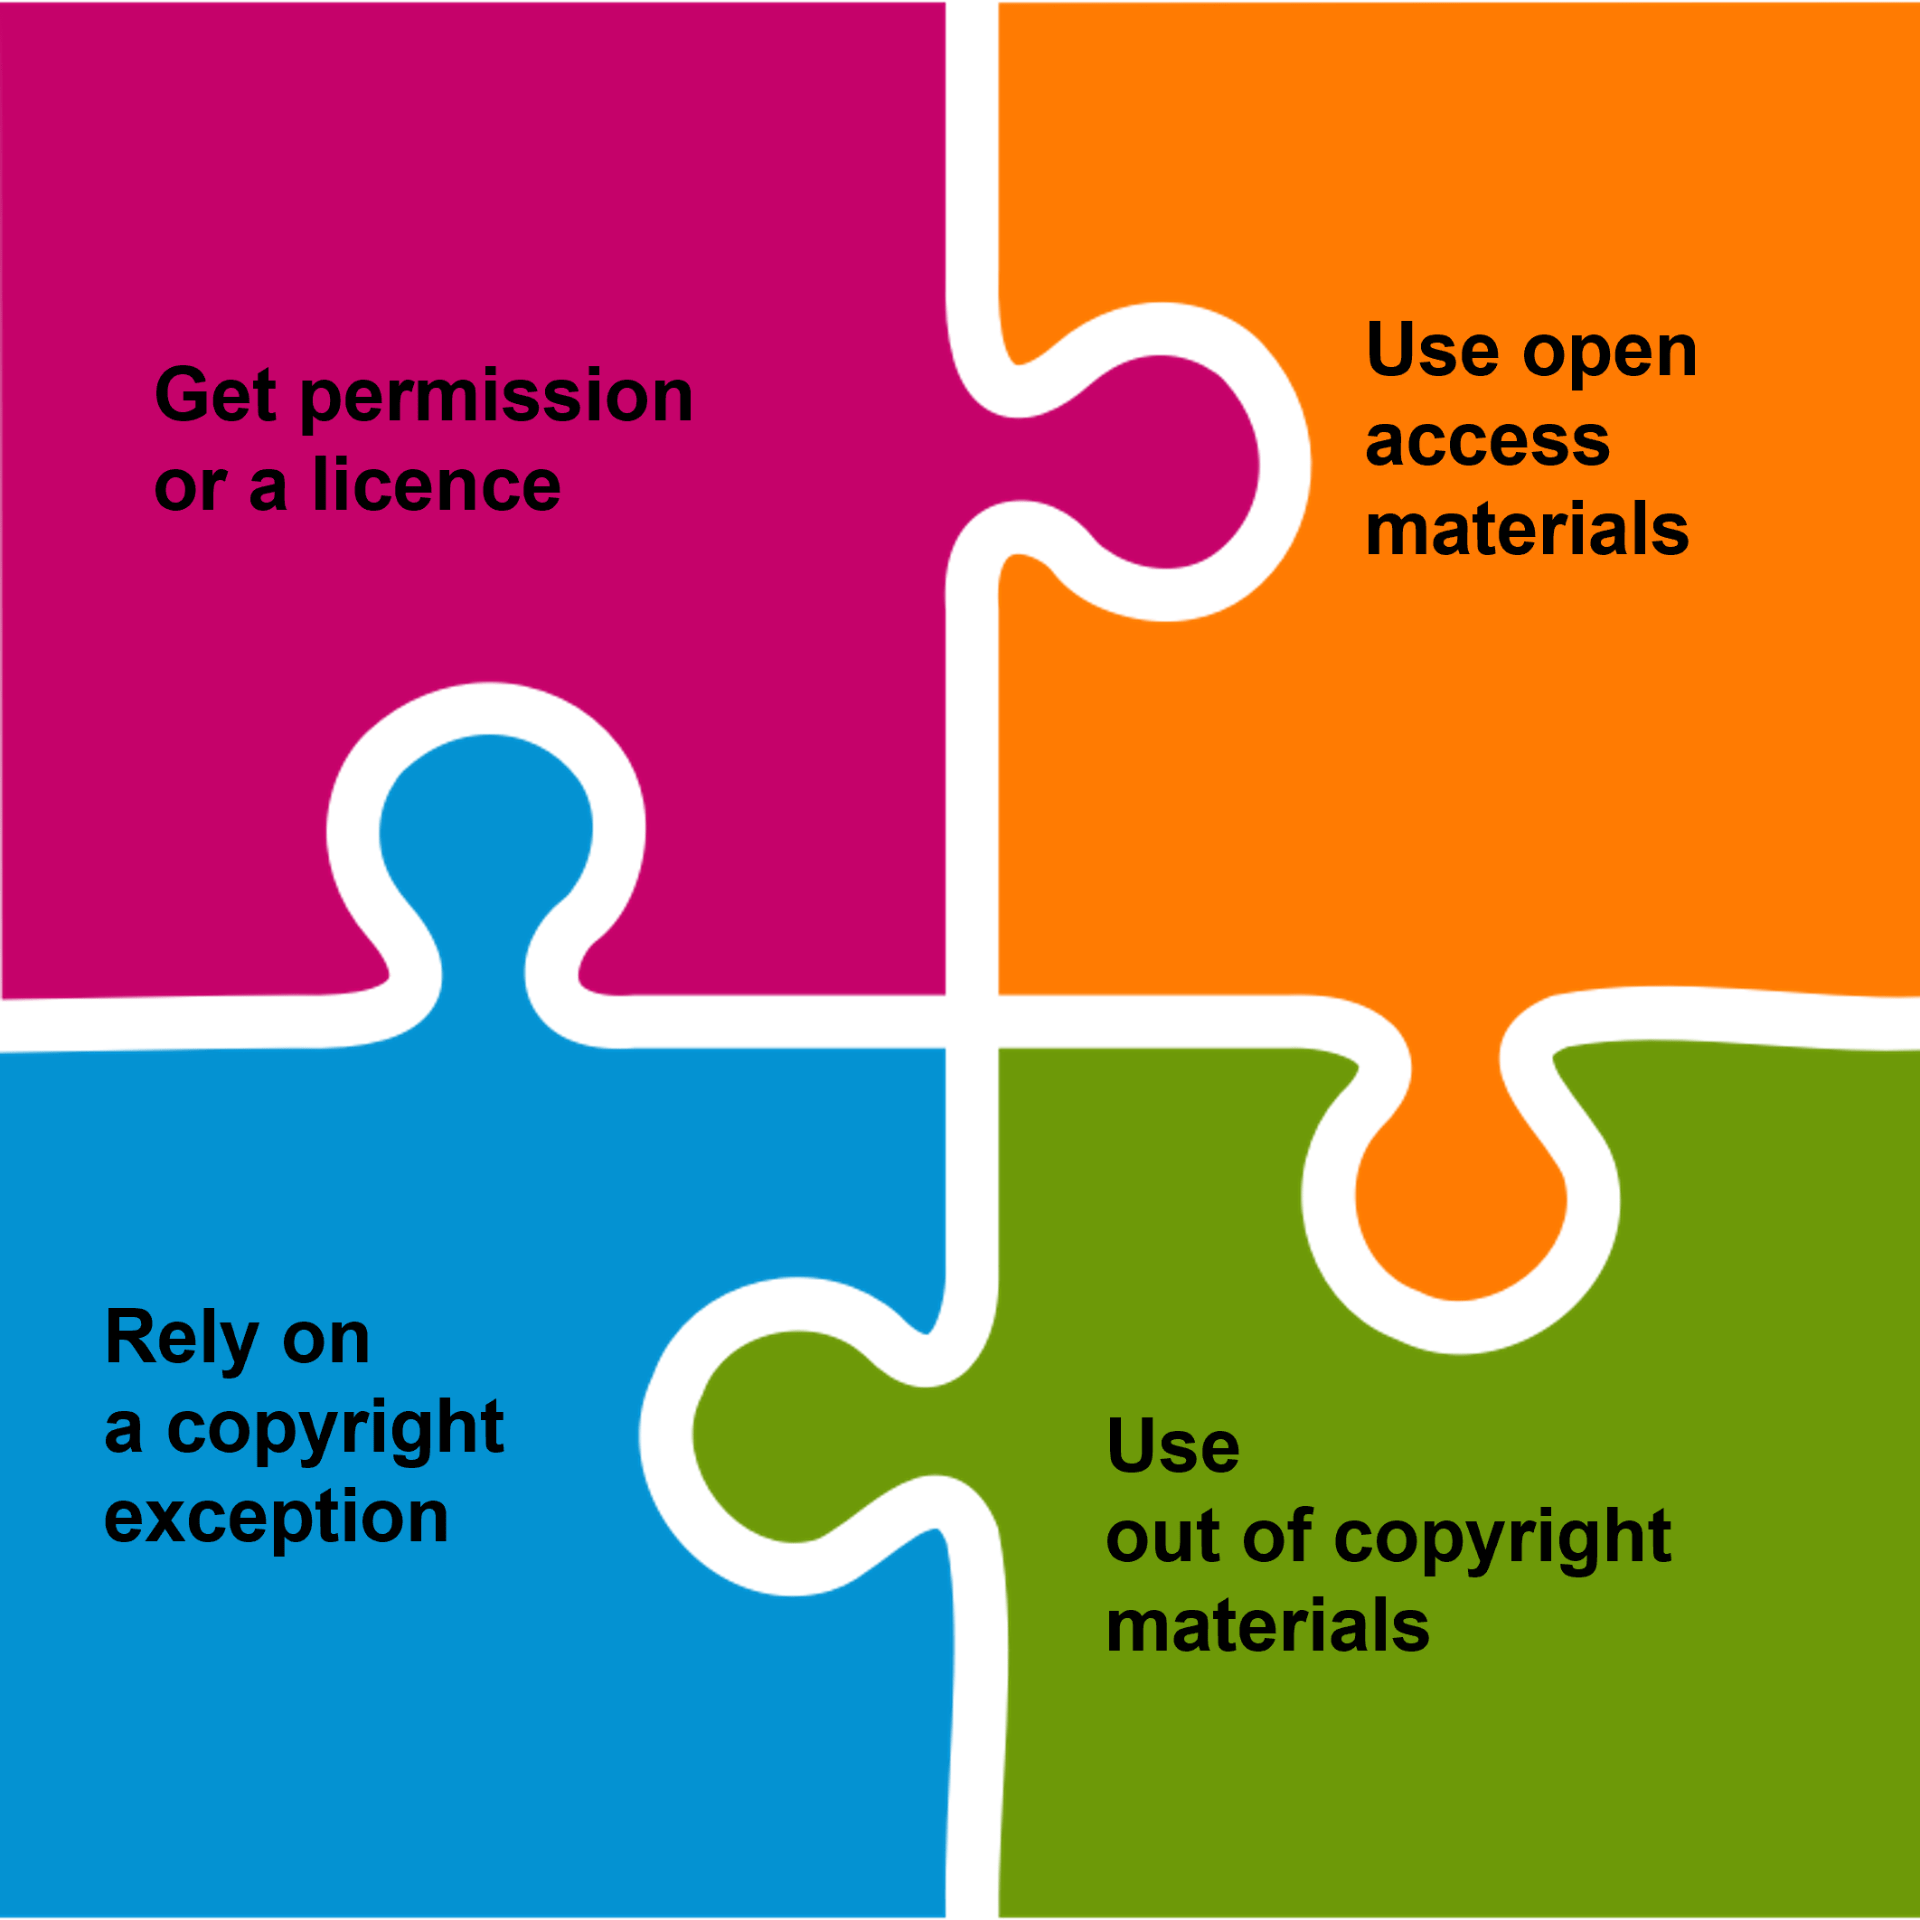 A square made of four puzzle pieces, each with a different title: 'Get permission or a licence', 'Use open access materials', Rely on a copyright exception', 'Use out of copyright materials'.